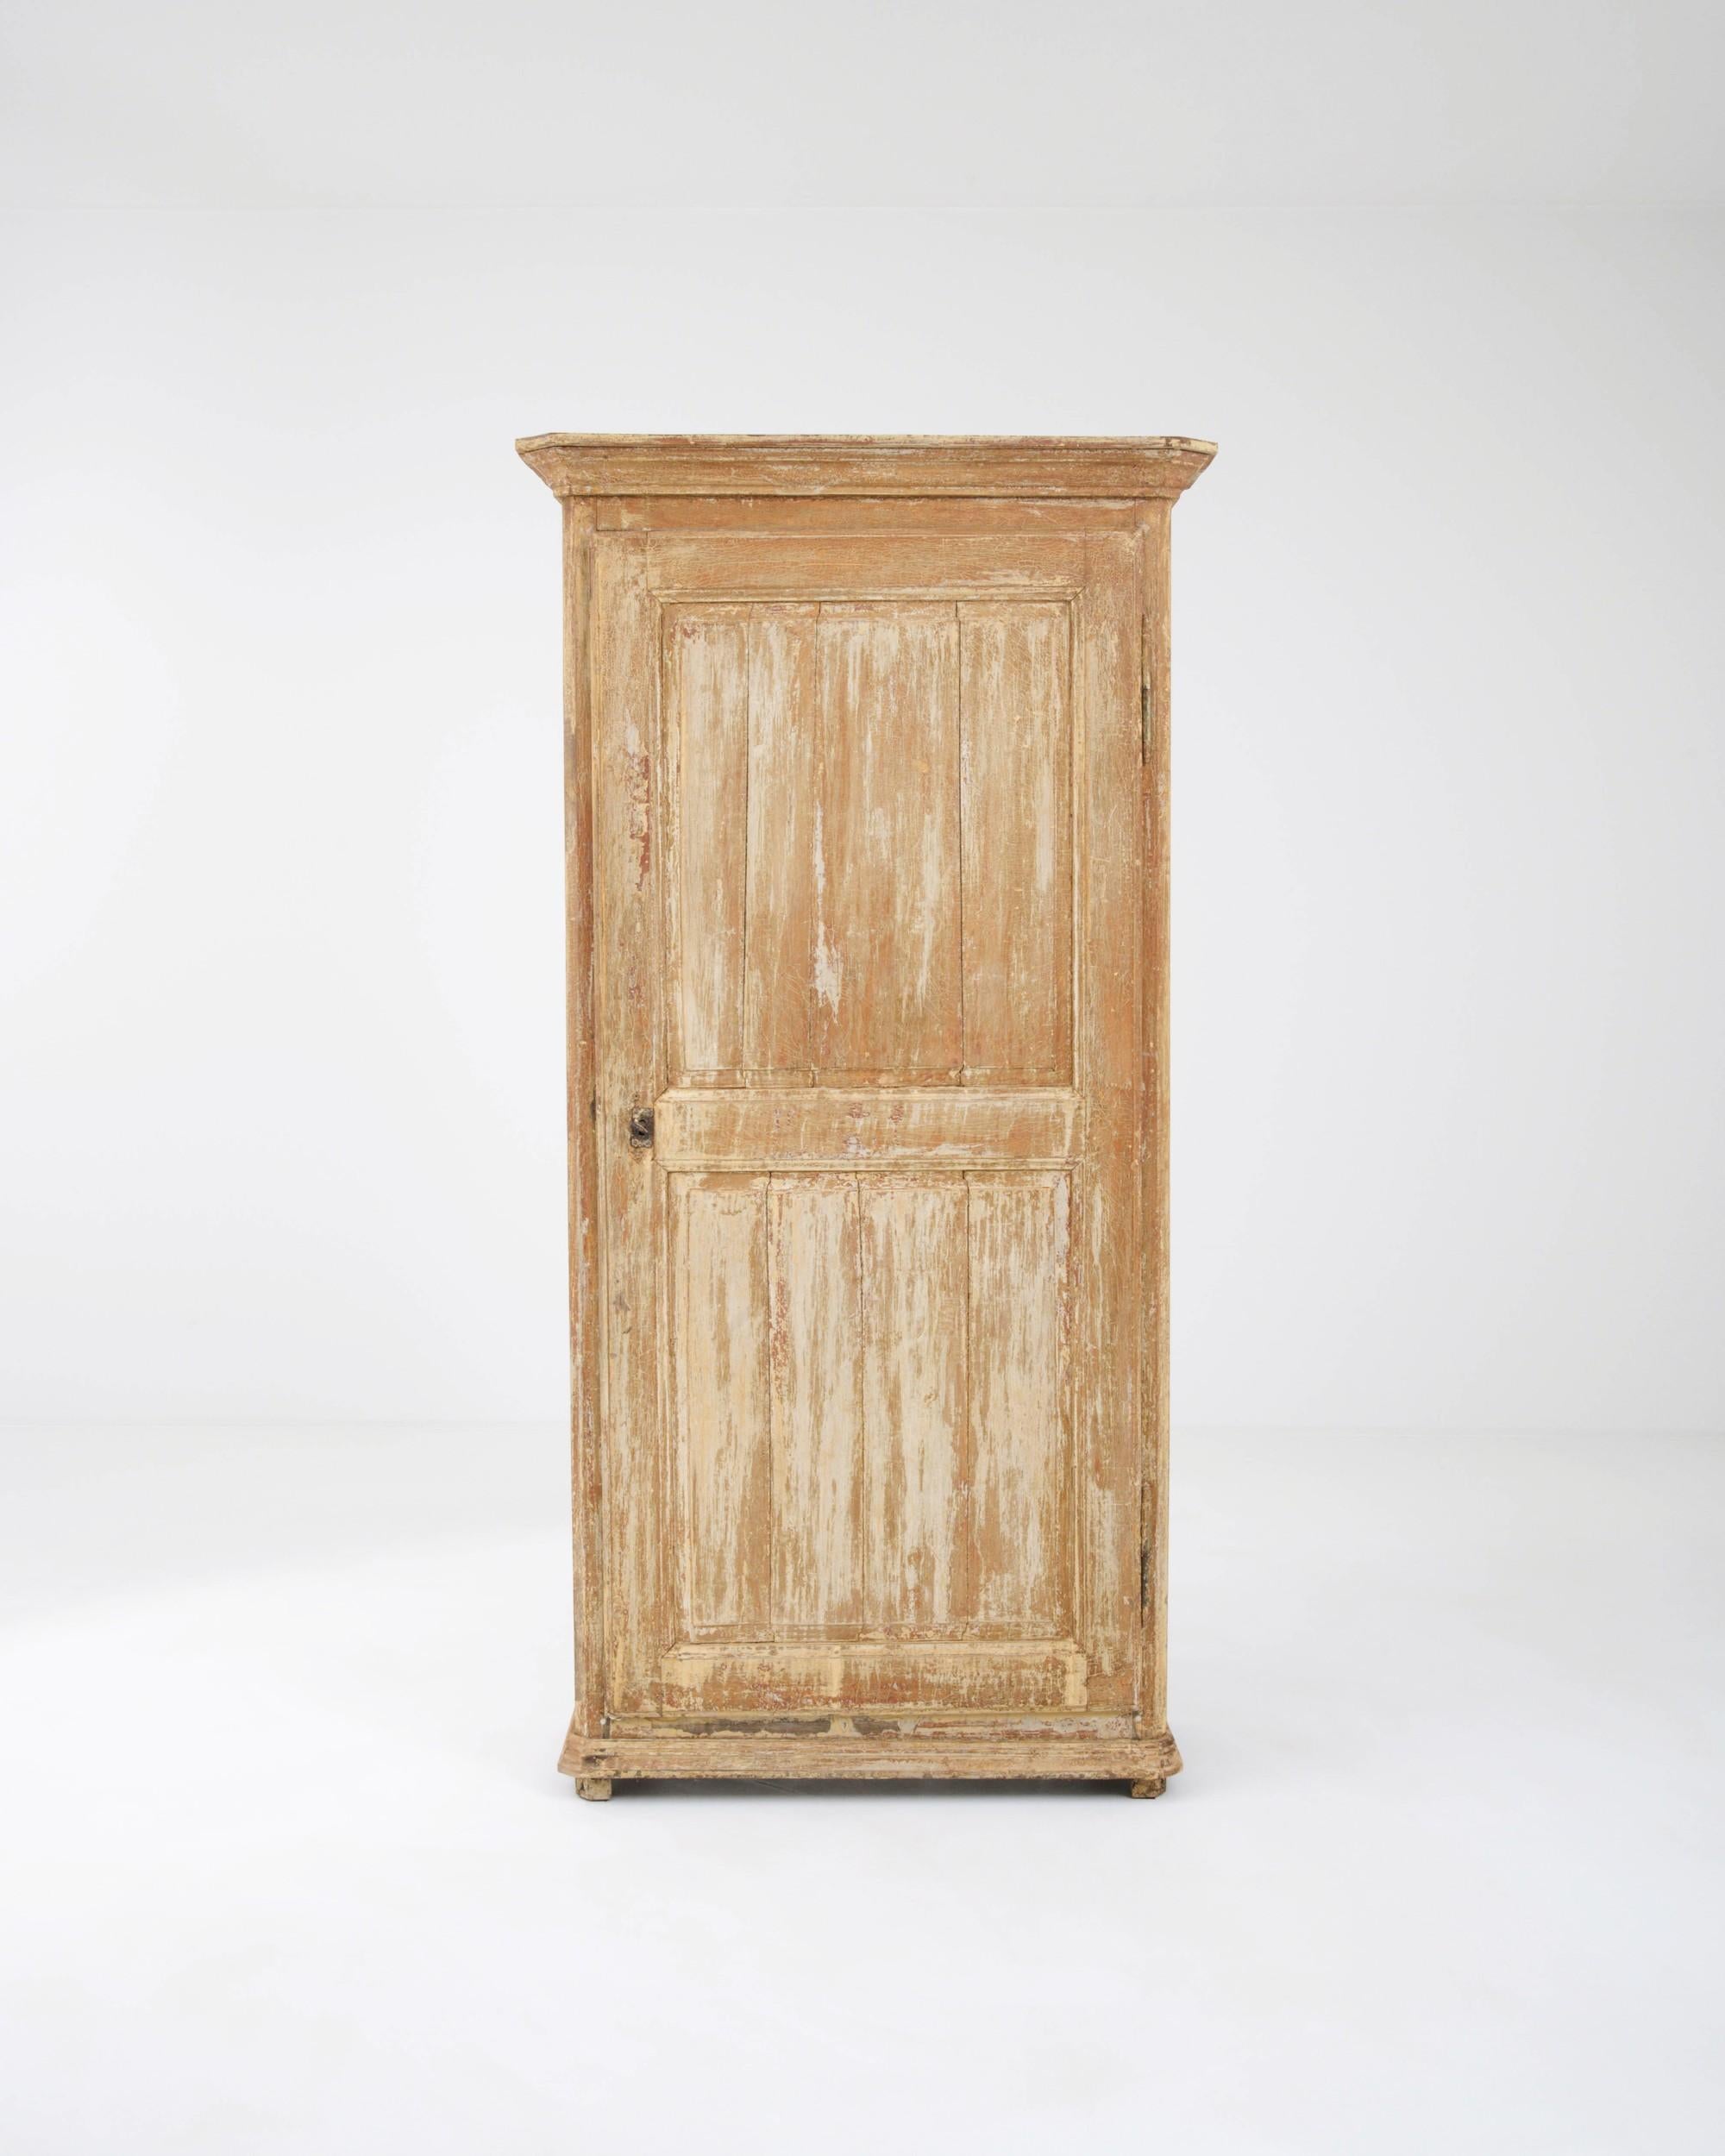 A timeworn patina gives this antique wooden cabinet a unique appeal. Hand-built in France in the 1800s, the once-painted surface of the exterior has worn to a soft craquelure, beneath which the warm tone of the natural wood is visible. The tall door